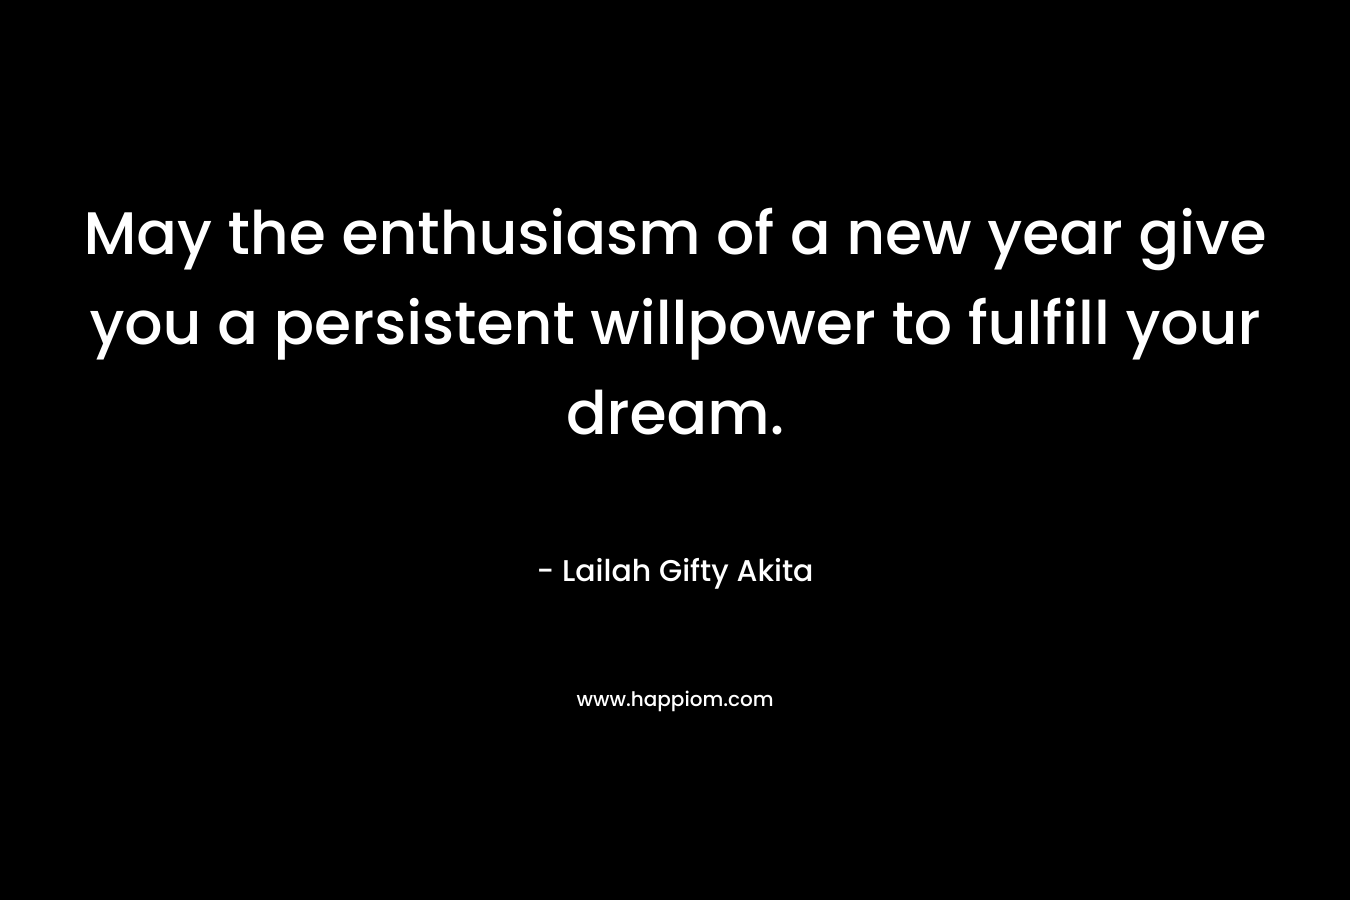 May the enthusiasm of a new year give you a persistent willpower to fulfill your dream.